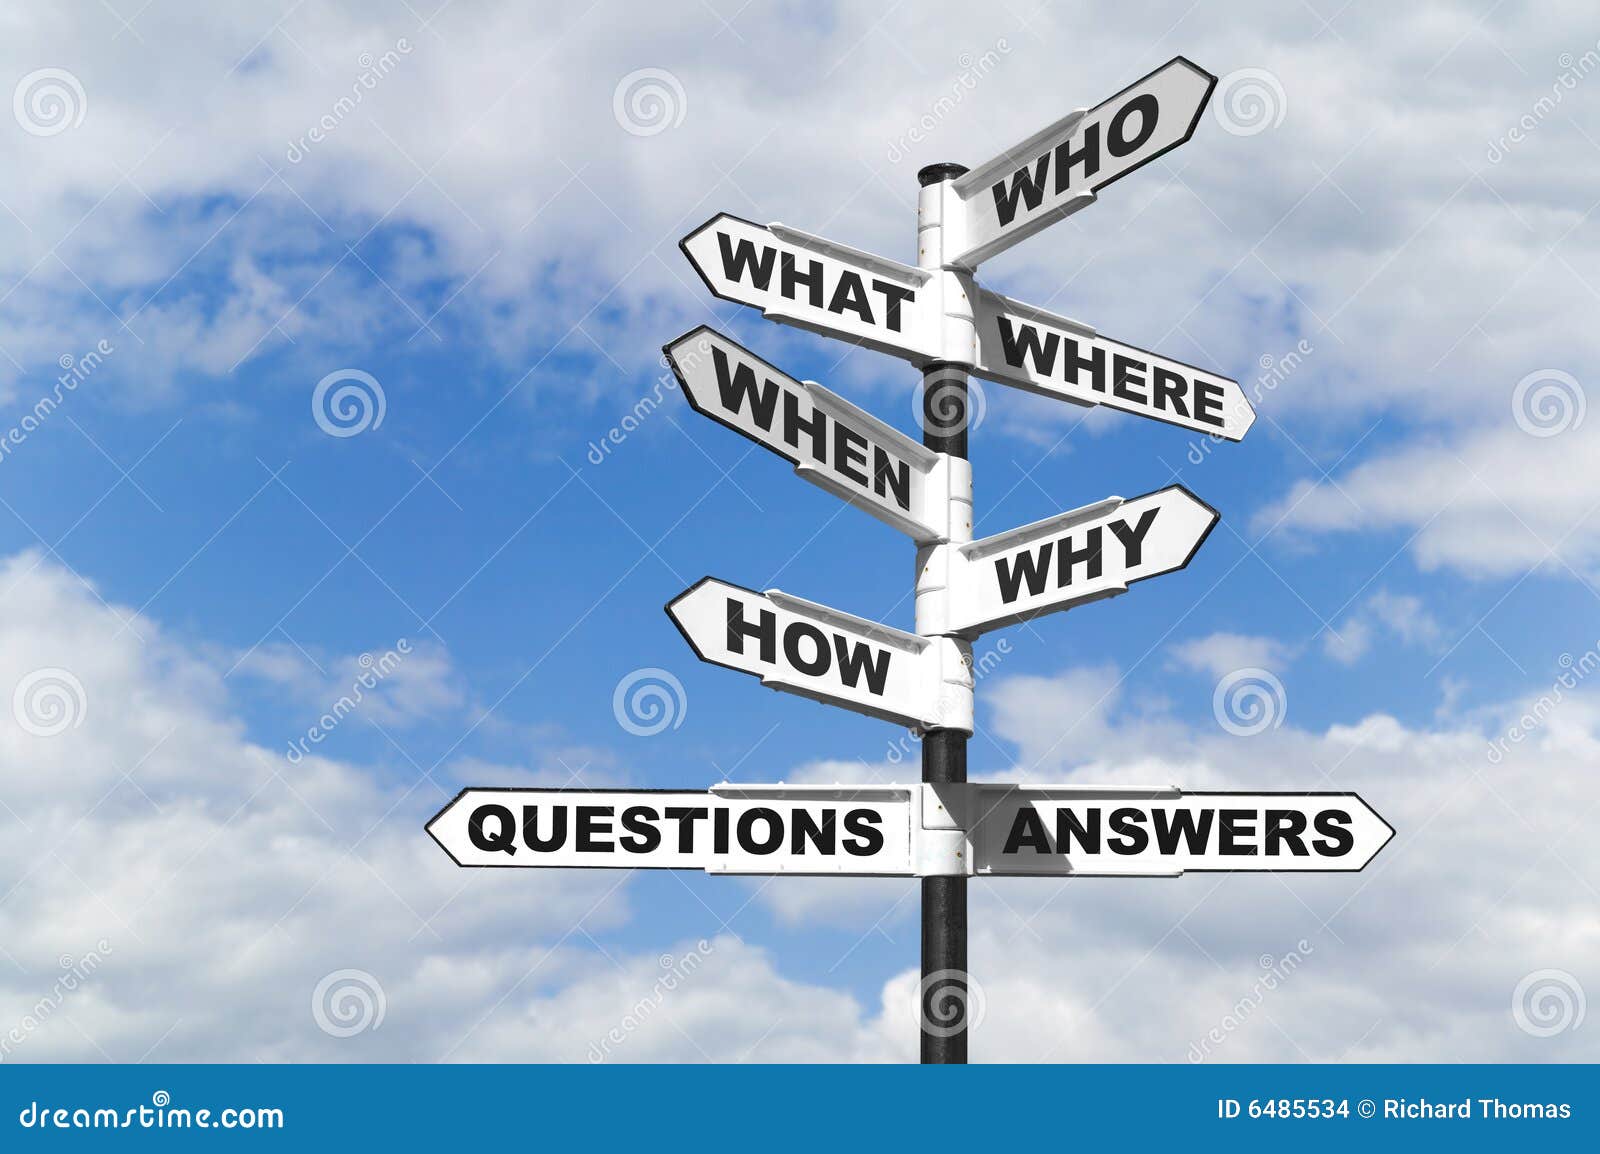 questions and answers signpost